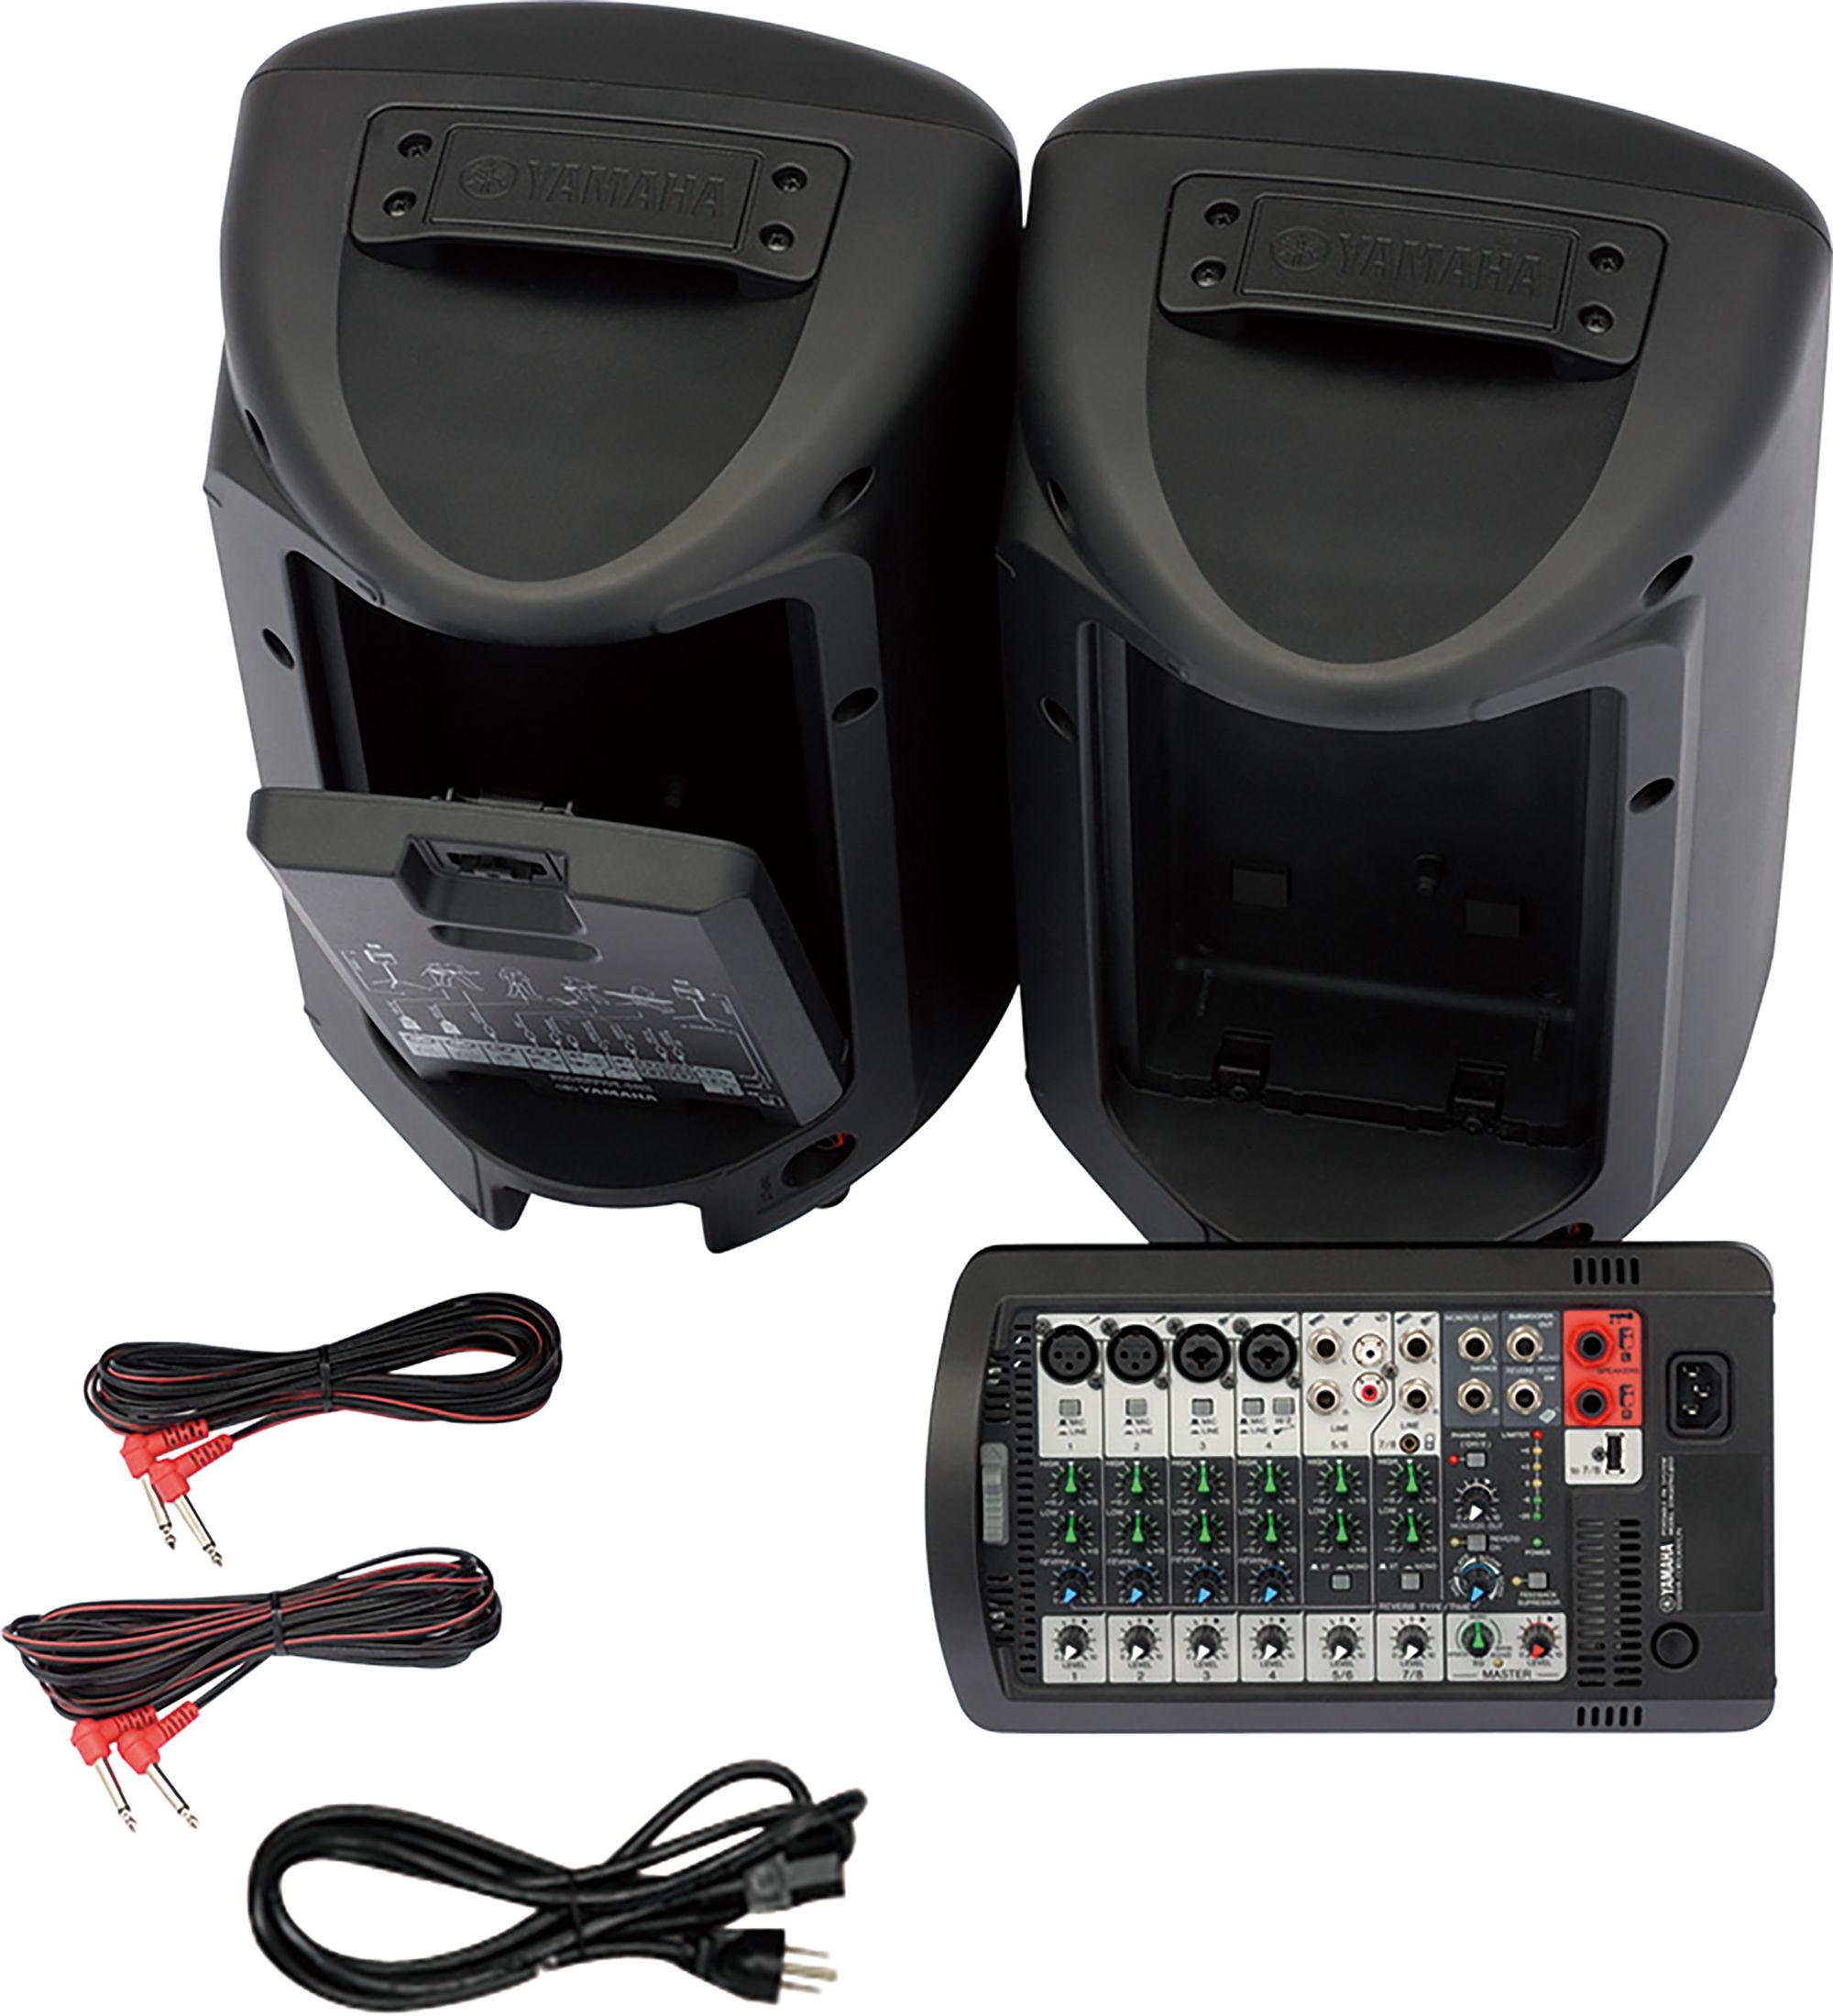 STAGEPAS 400i, 600i - Overview - PA Systems - Professional Audio 